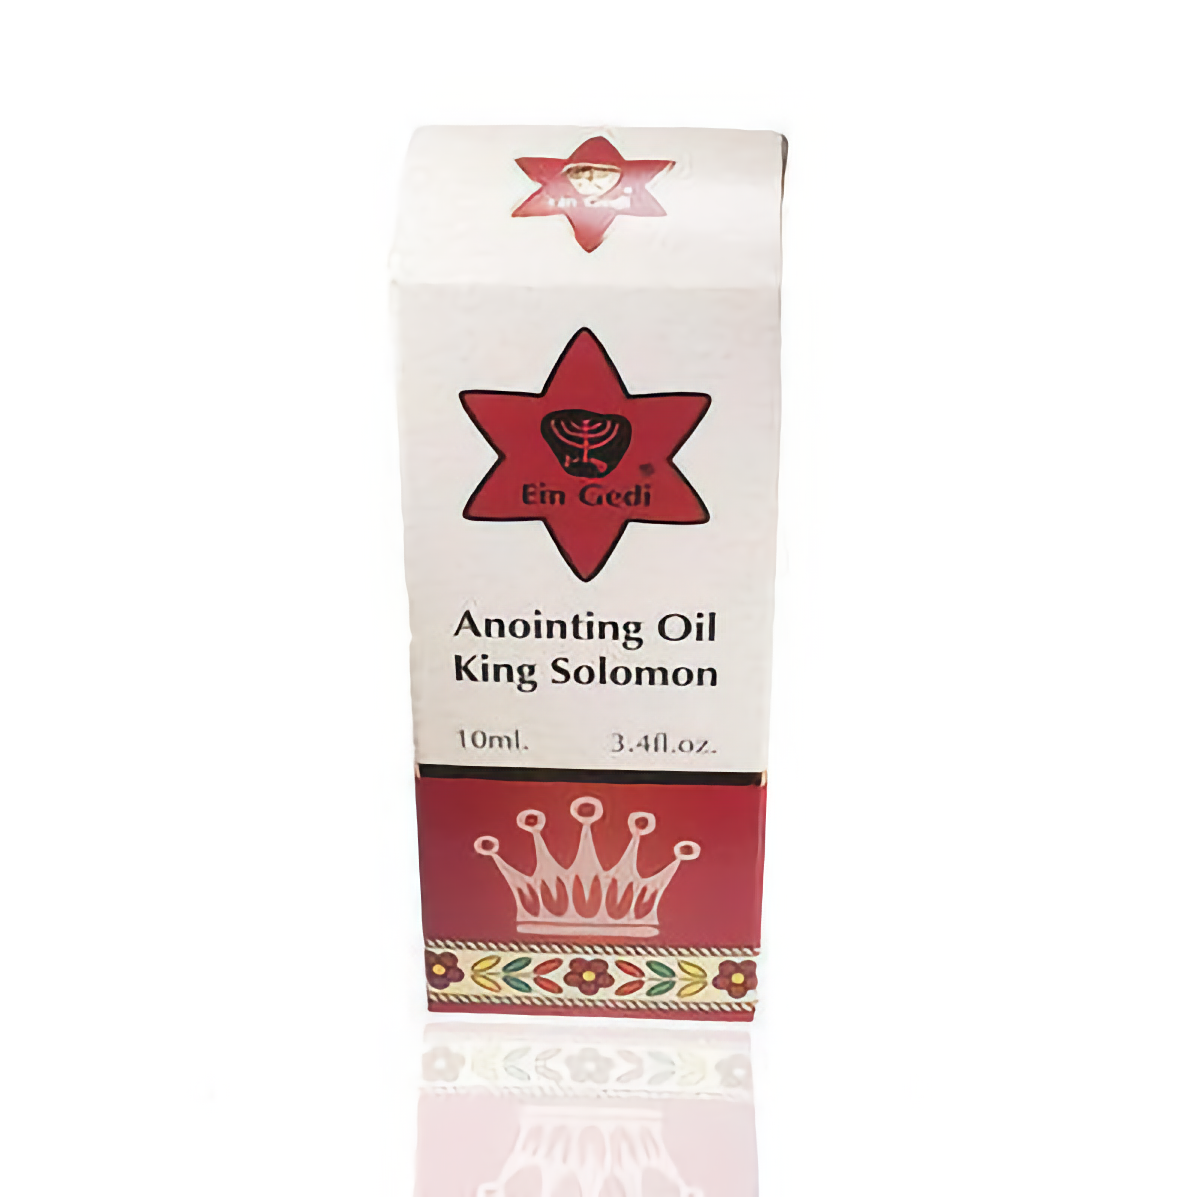 5 x Roll On Anointing Oil King Solomon 10 ml- 0.34 oz From Holyland Jerusalem